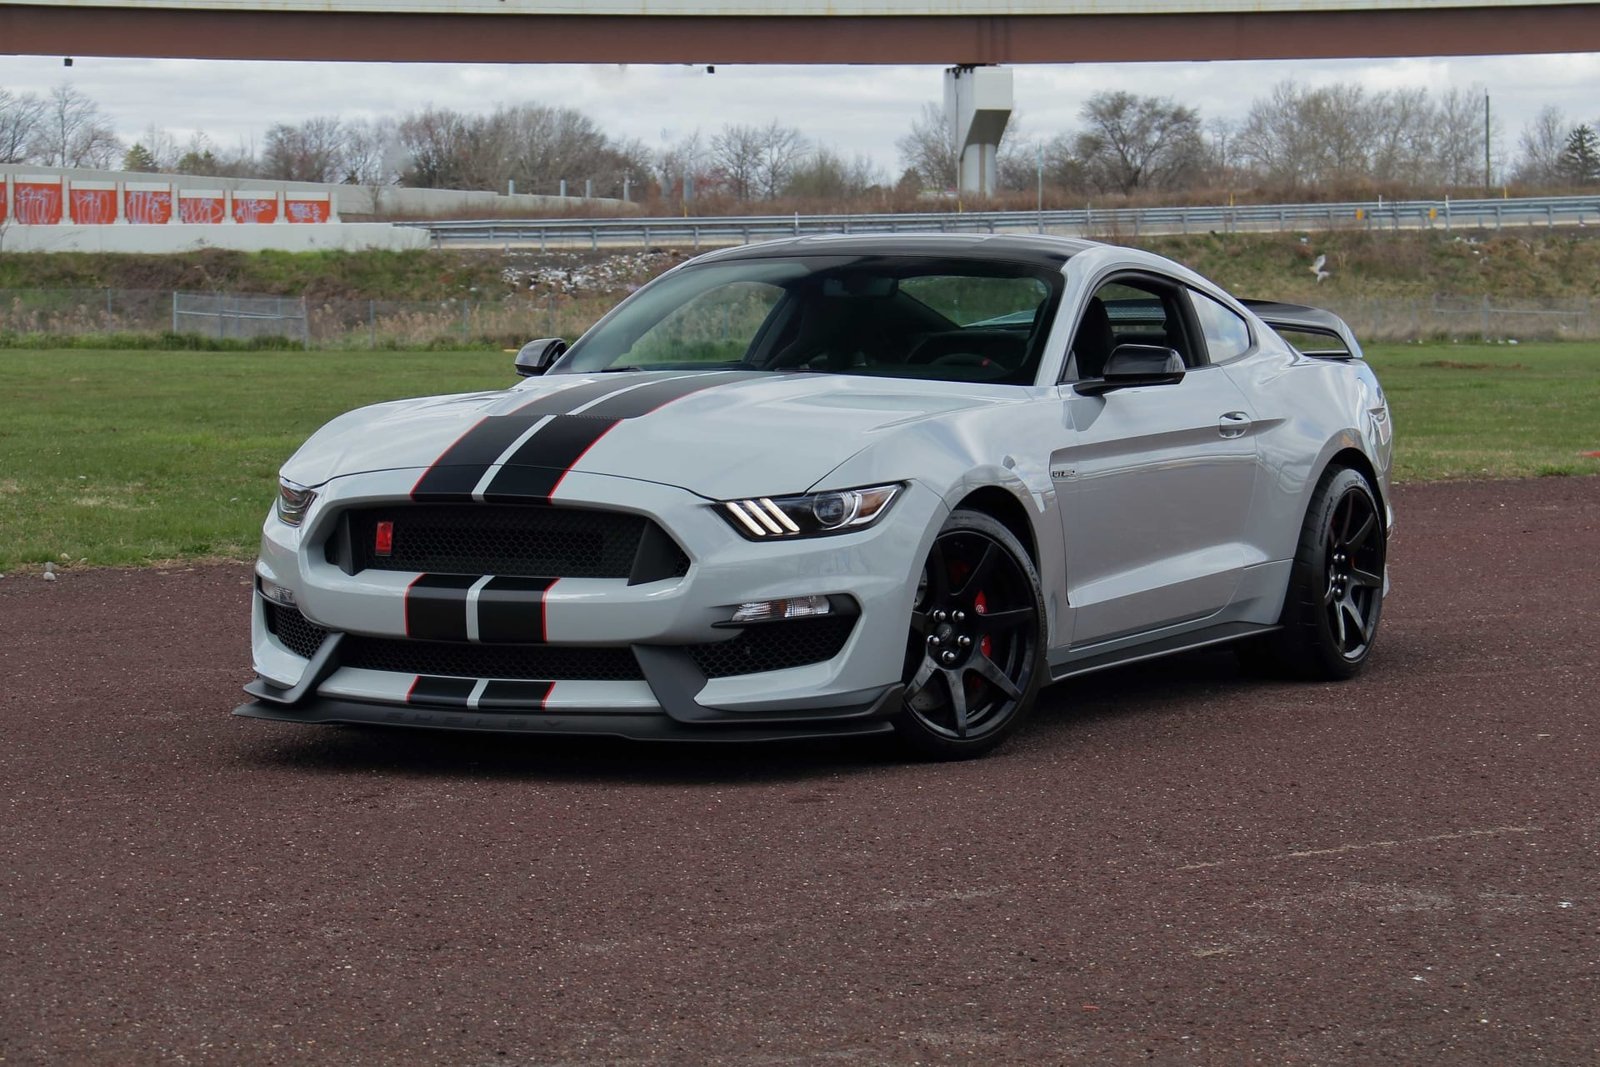 2016 Ford Shelby GT350R For Sale